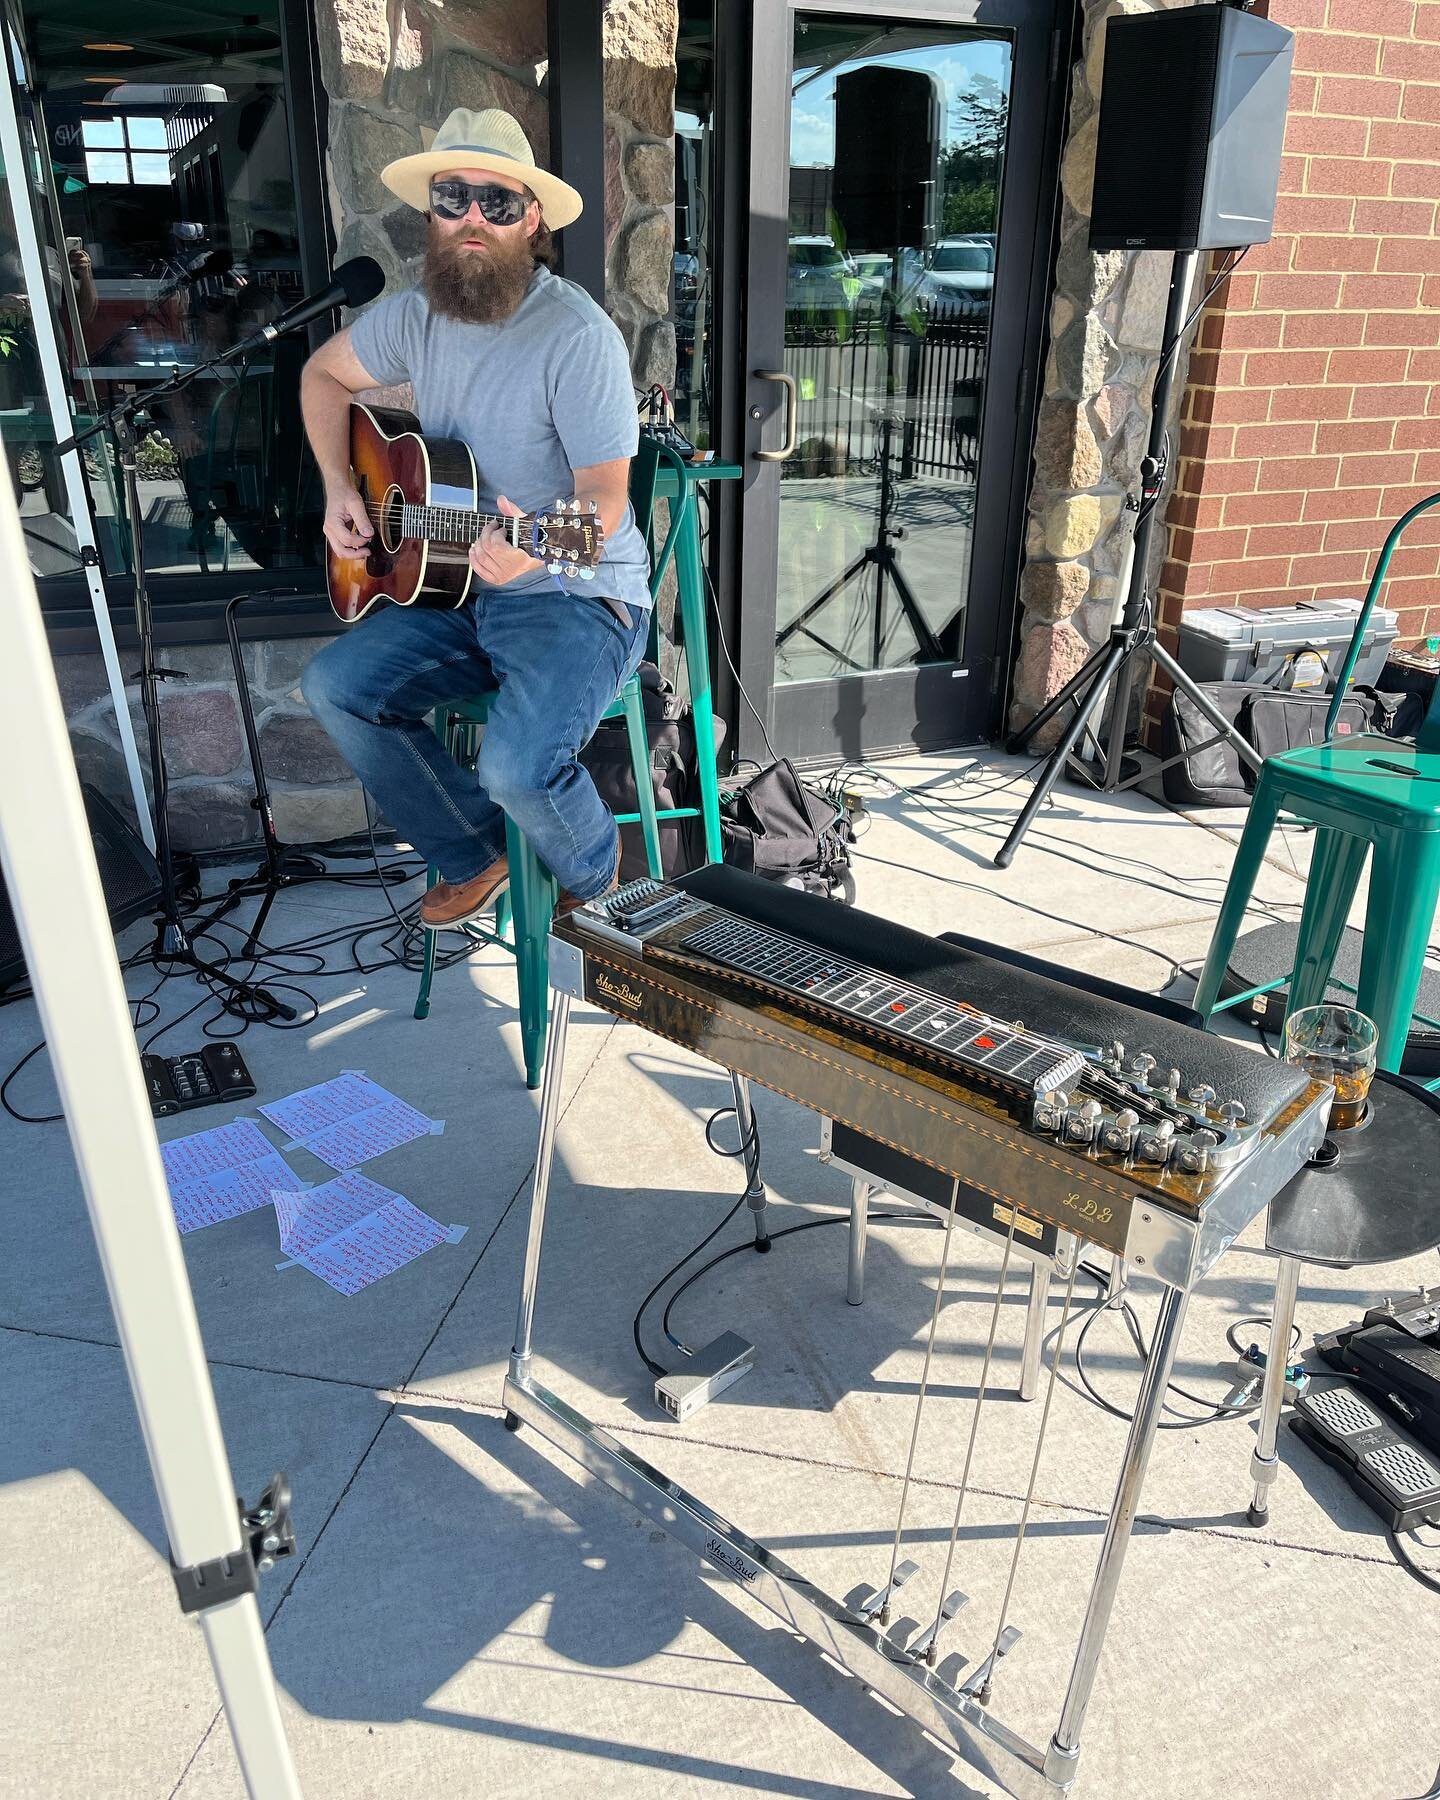 We&rsquo;ve got a player! Current LDG project made it to a gig on the patio. Holding tune well and sounds great so far. 

Someone put dibs on it but I miss it already. First time I&rsquo;ve played a Truetone in a Bud. Killer tone.